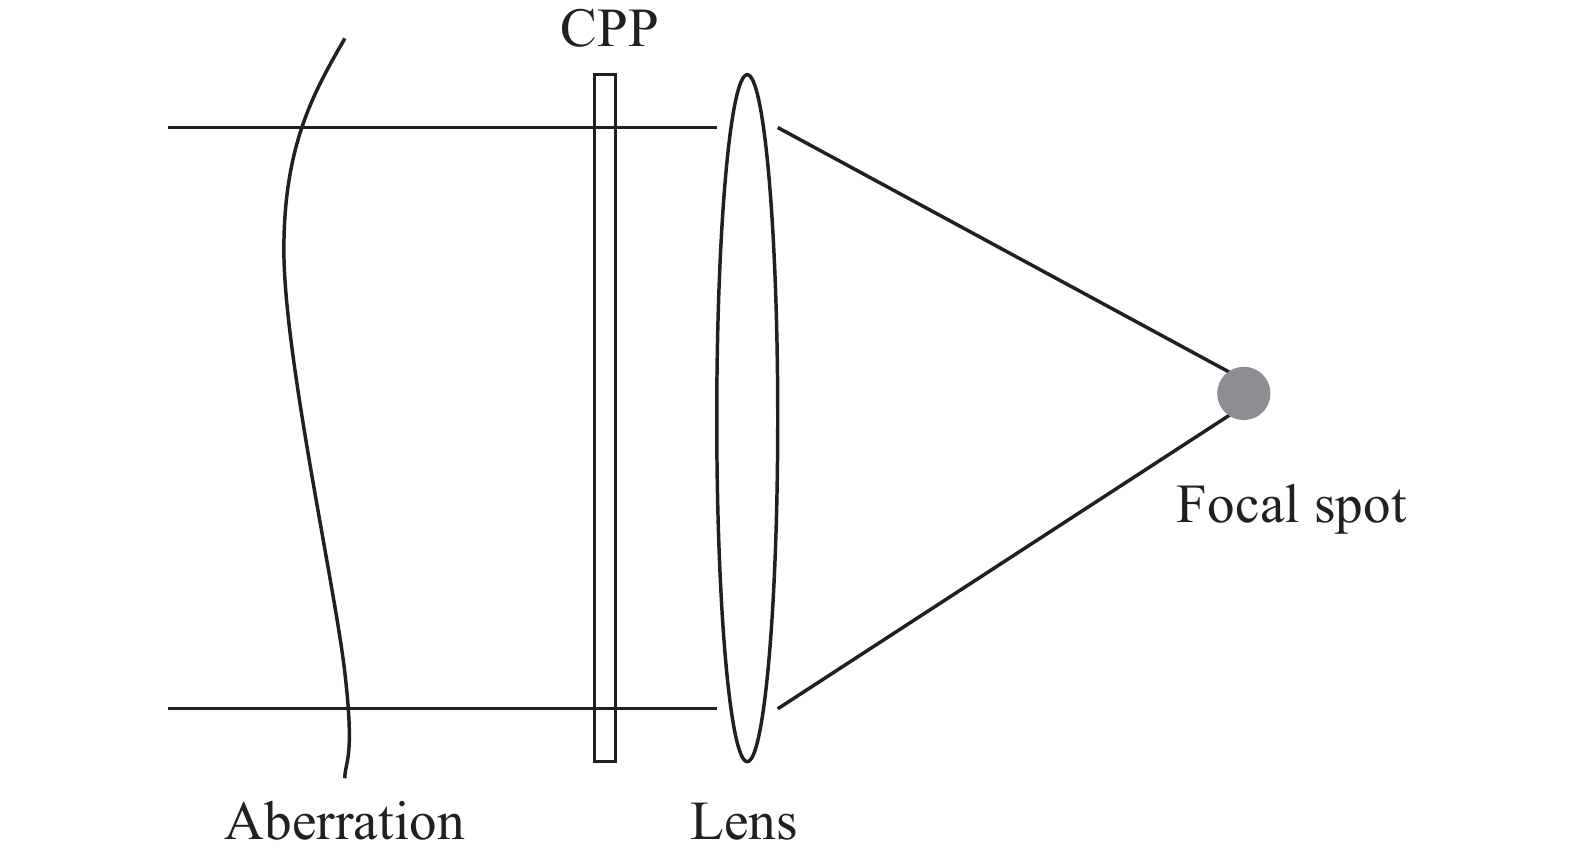 Application light path of CPP